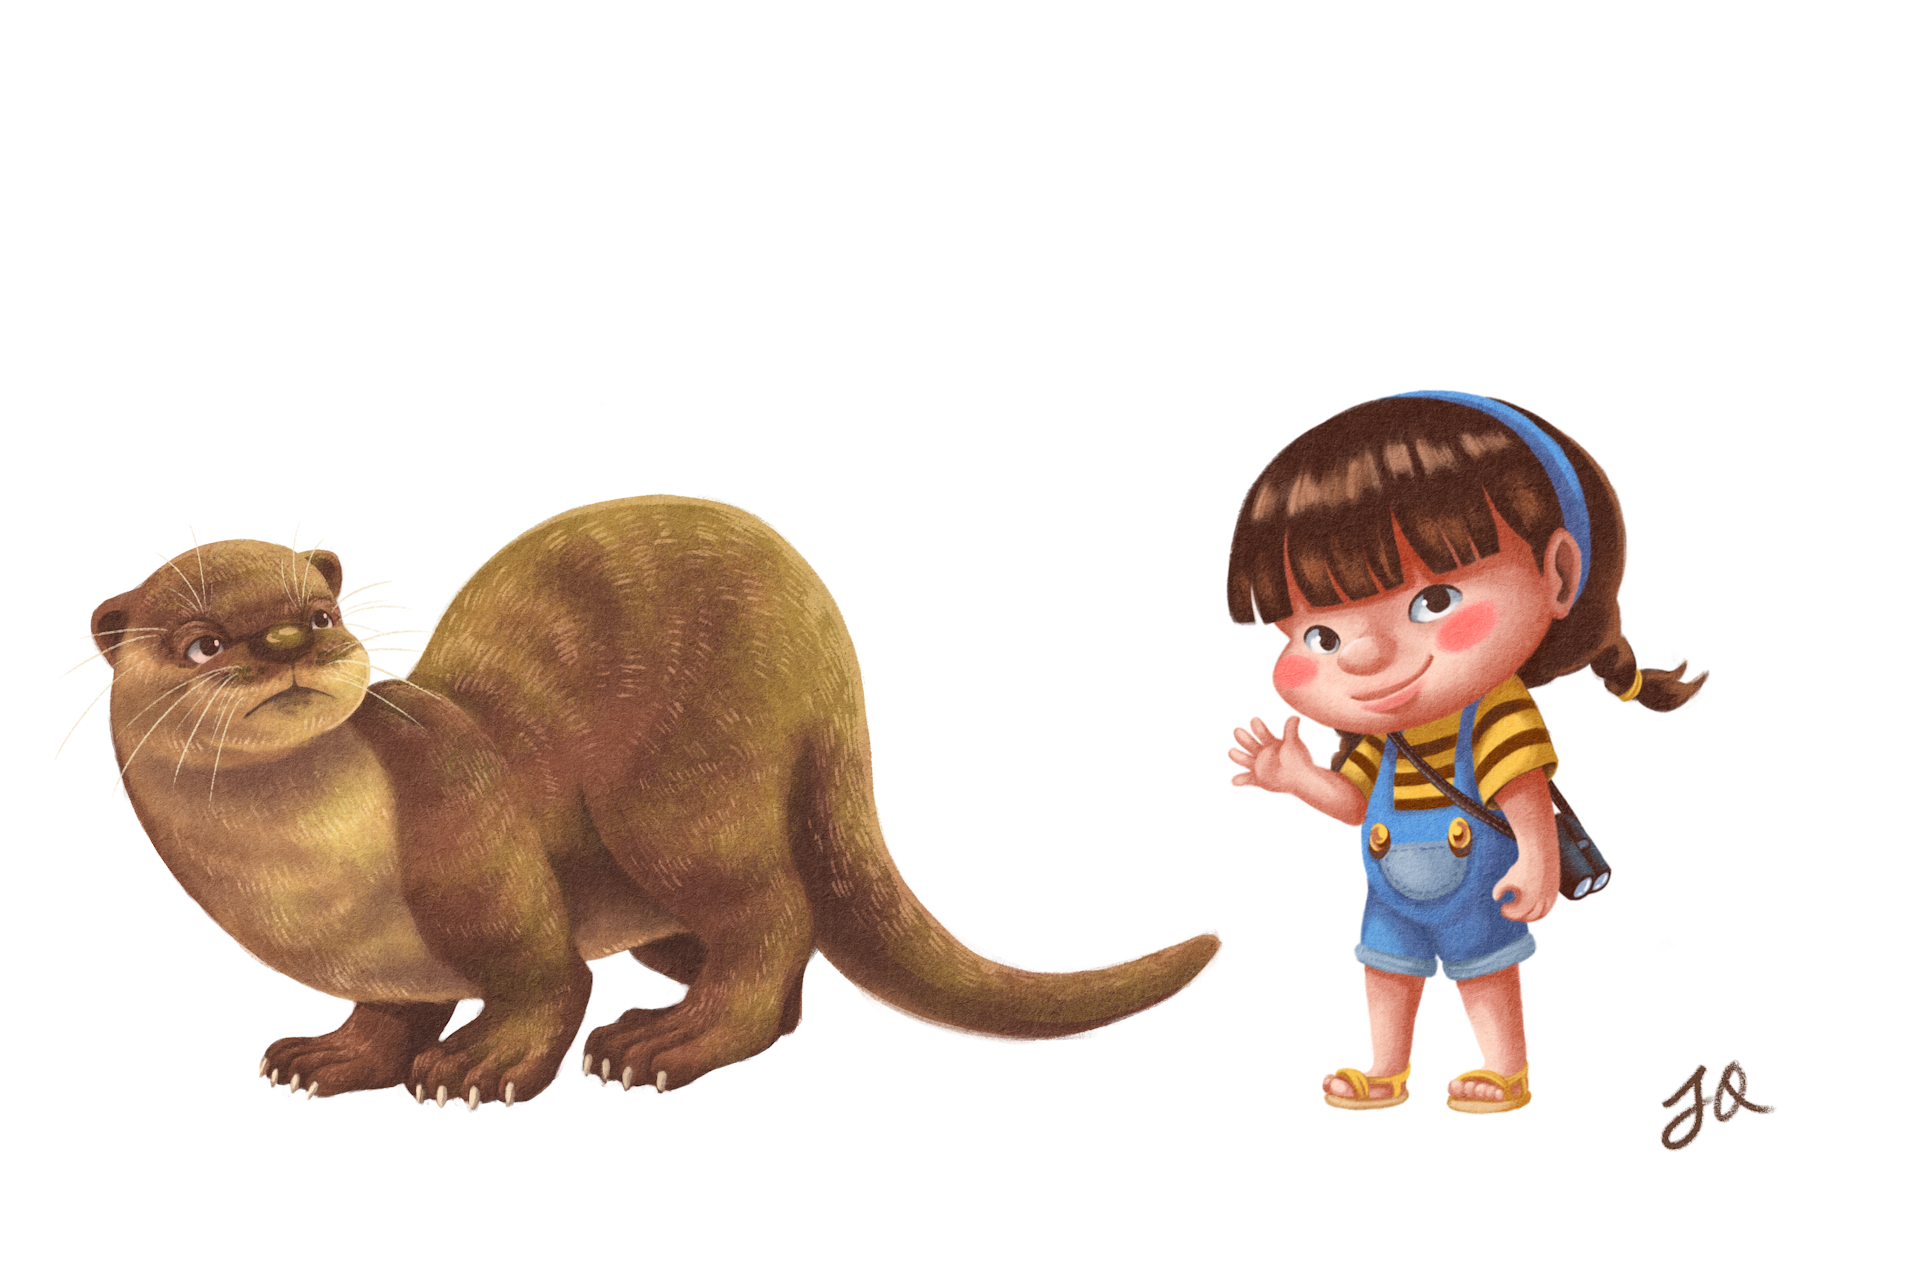 Color/rendering study of Mr. Otter, placed next to Shan Shan for size reference.